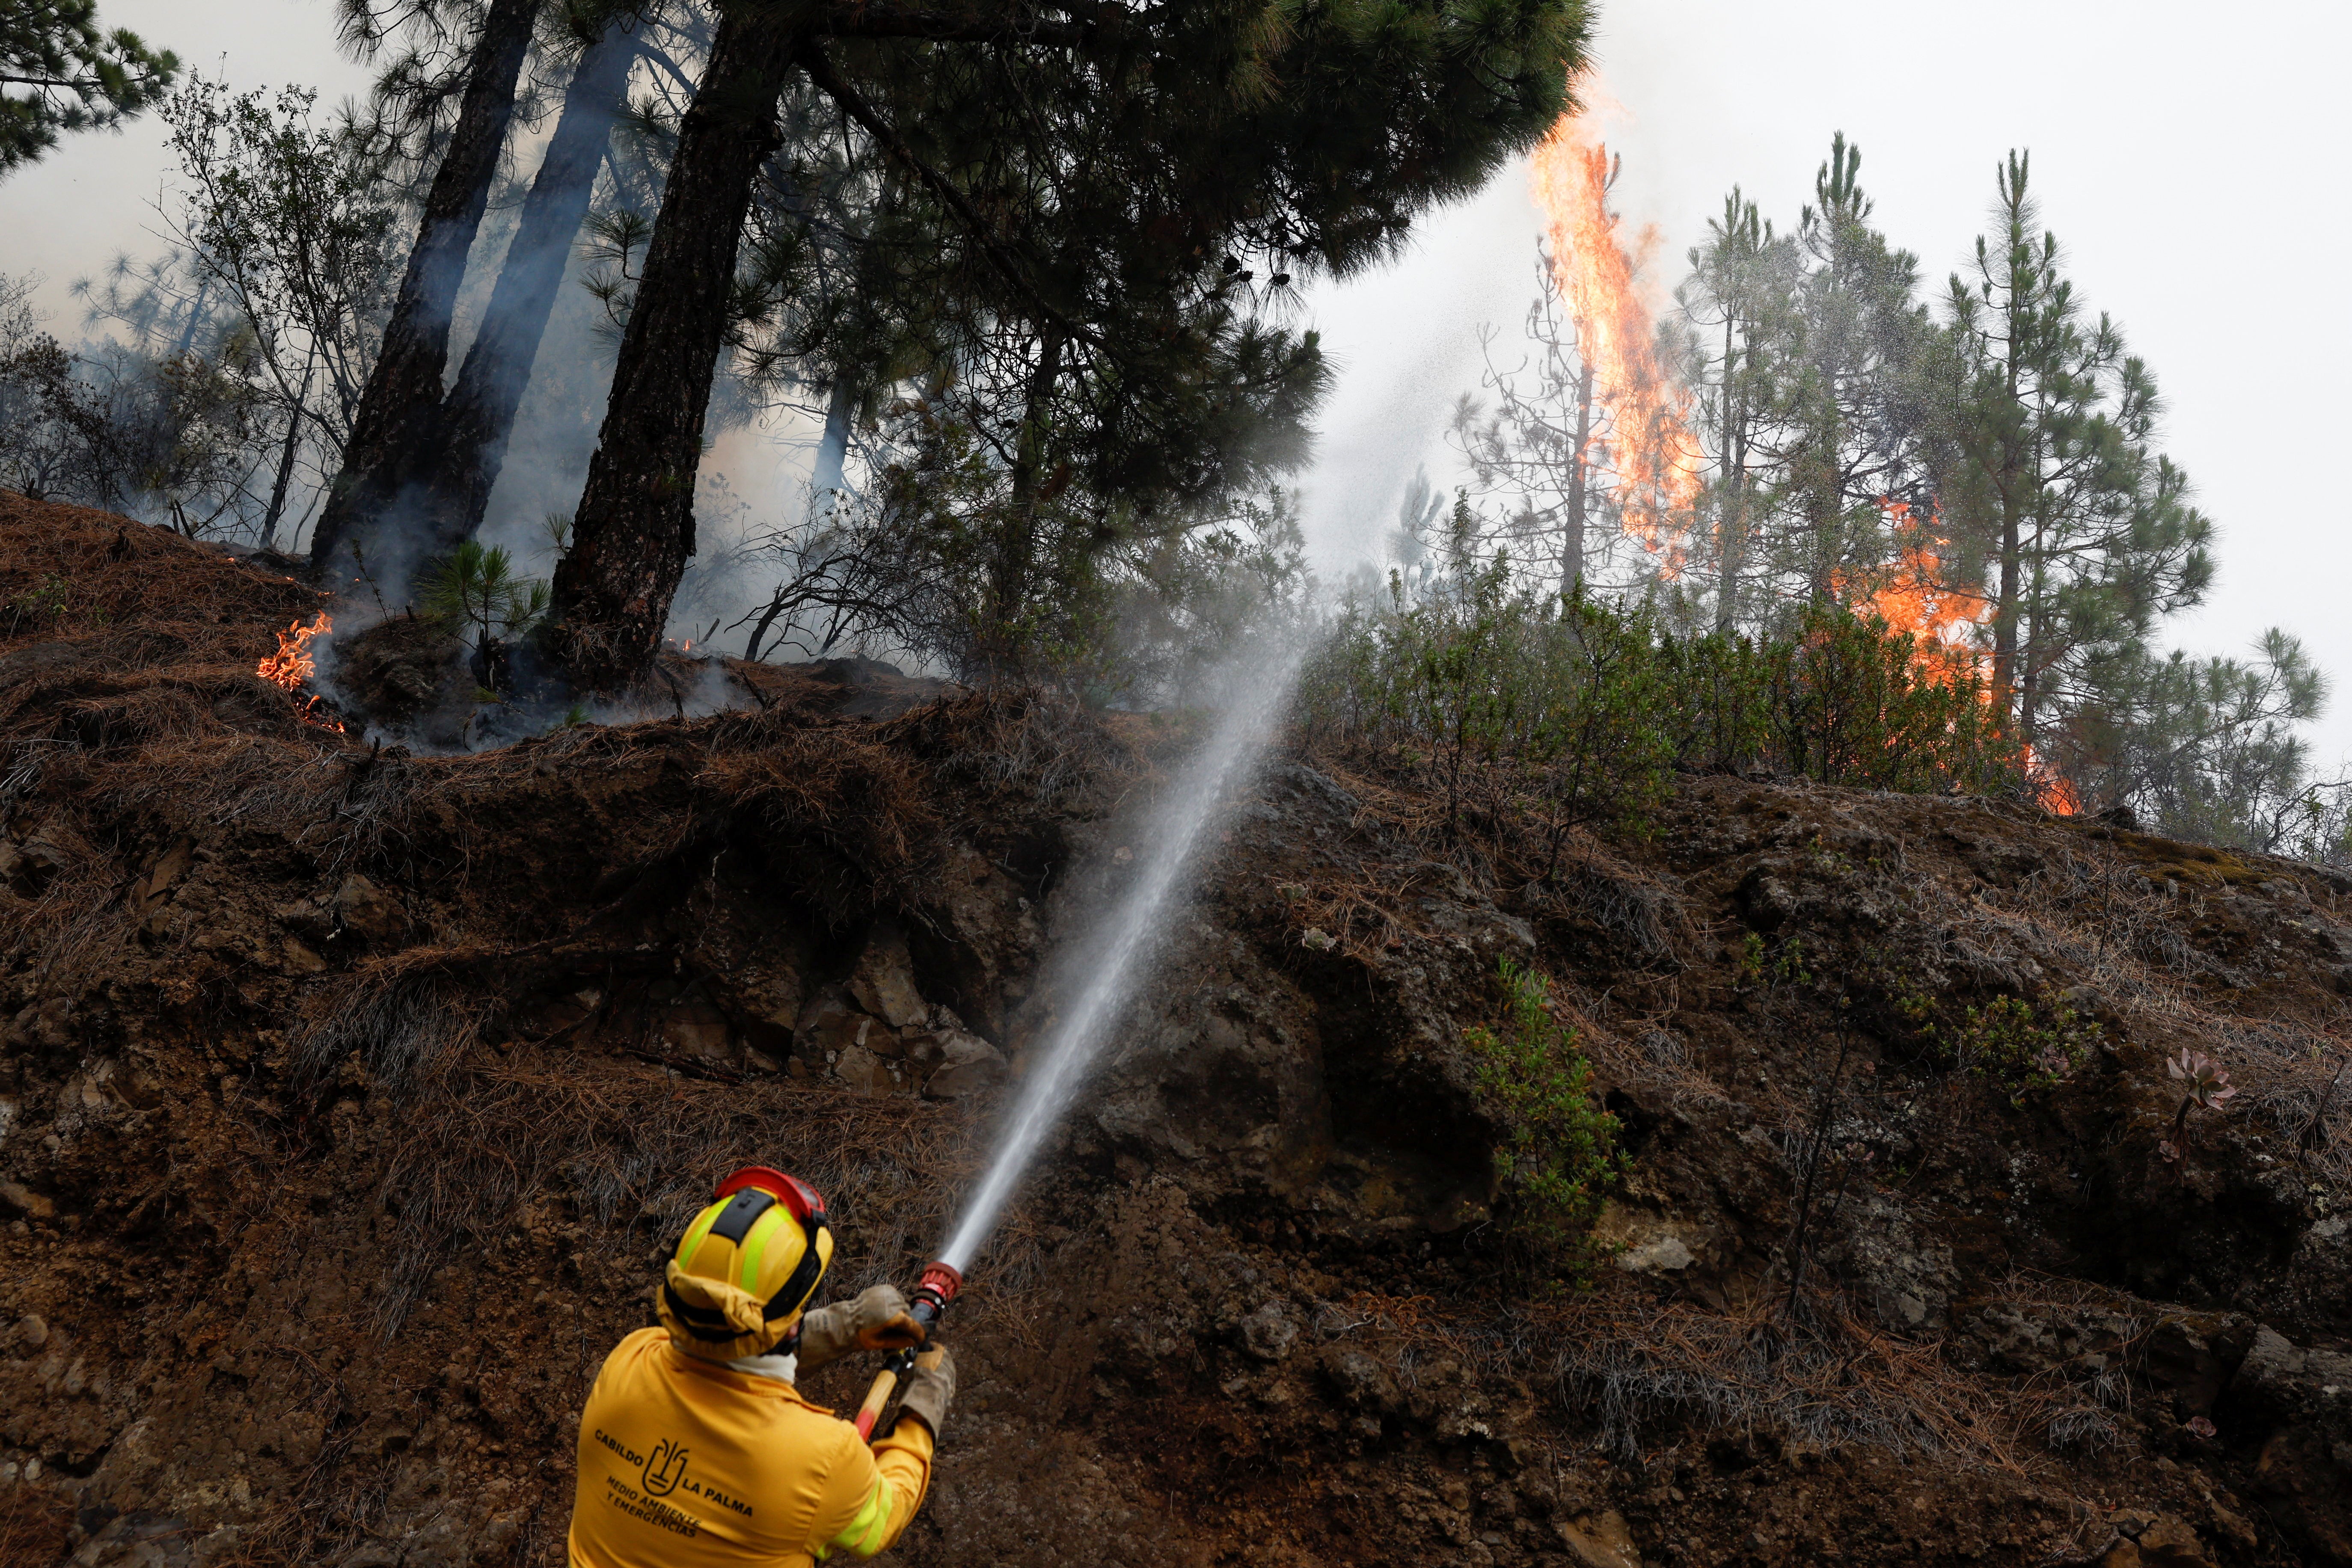 A forest firefighter works to extinguish the Tijarafe forest fire on the Canary Island of La Palma, Spain as the hot weather throughout the Mediterranean region could continue for weeks